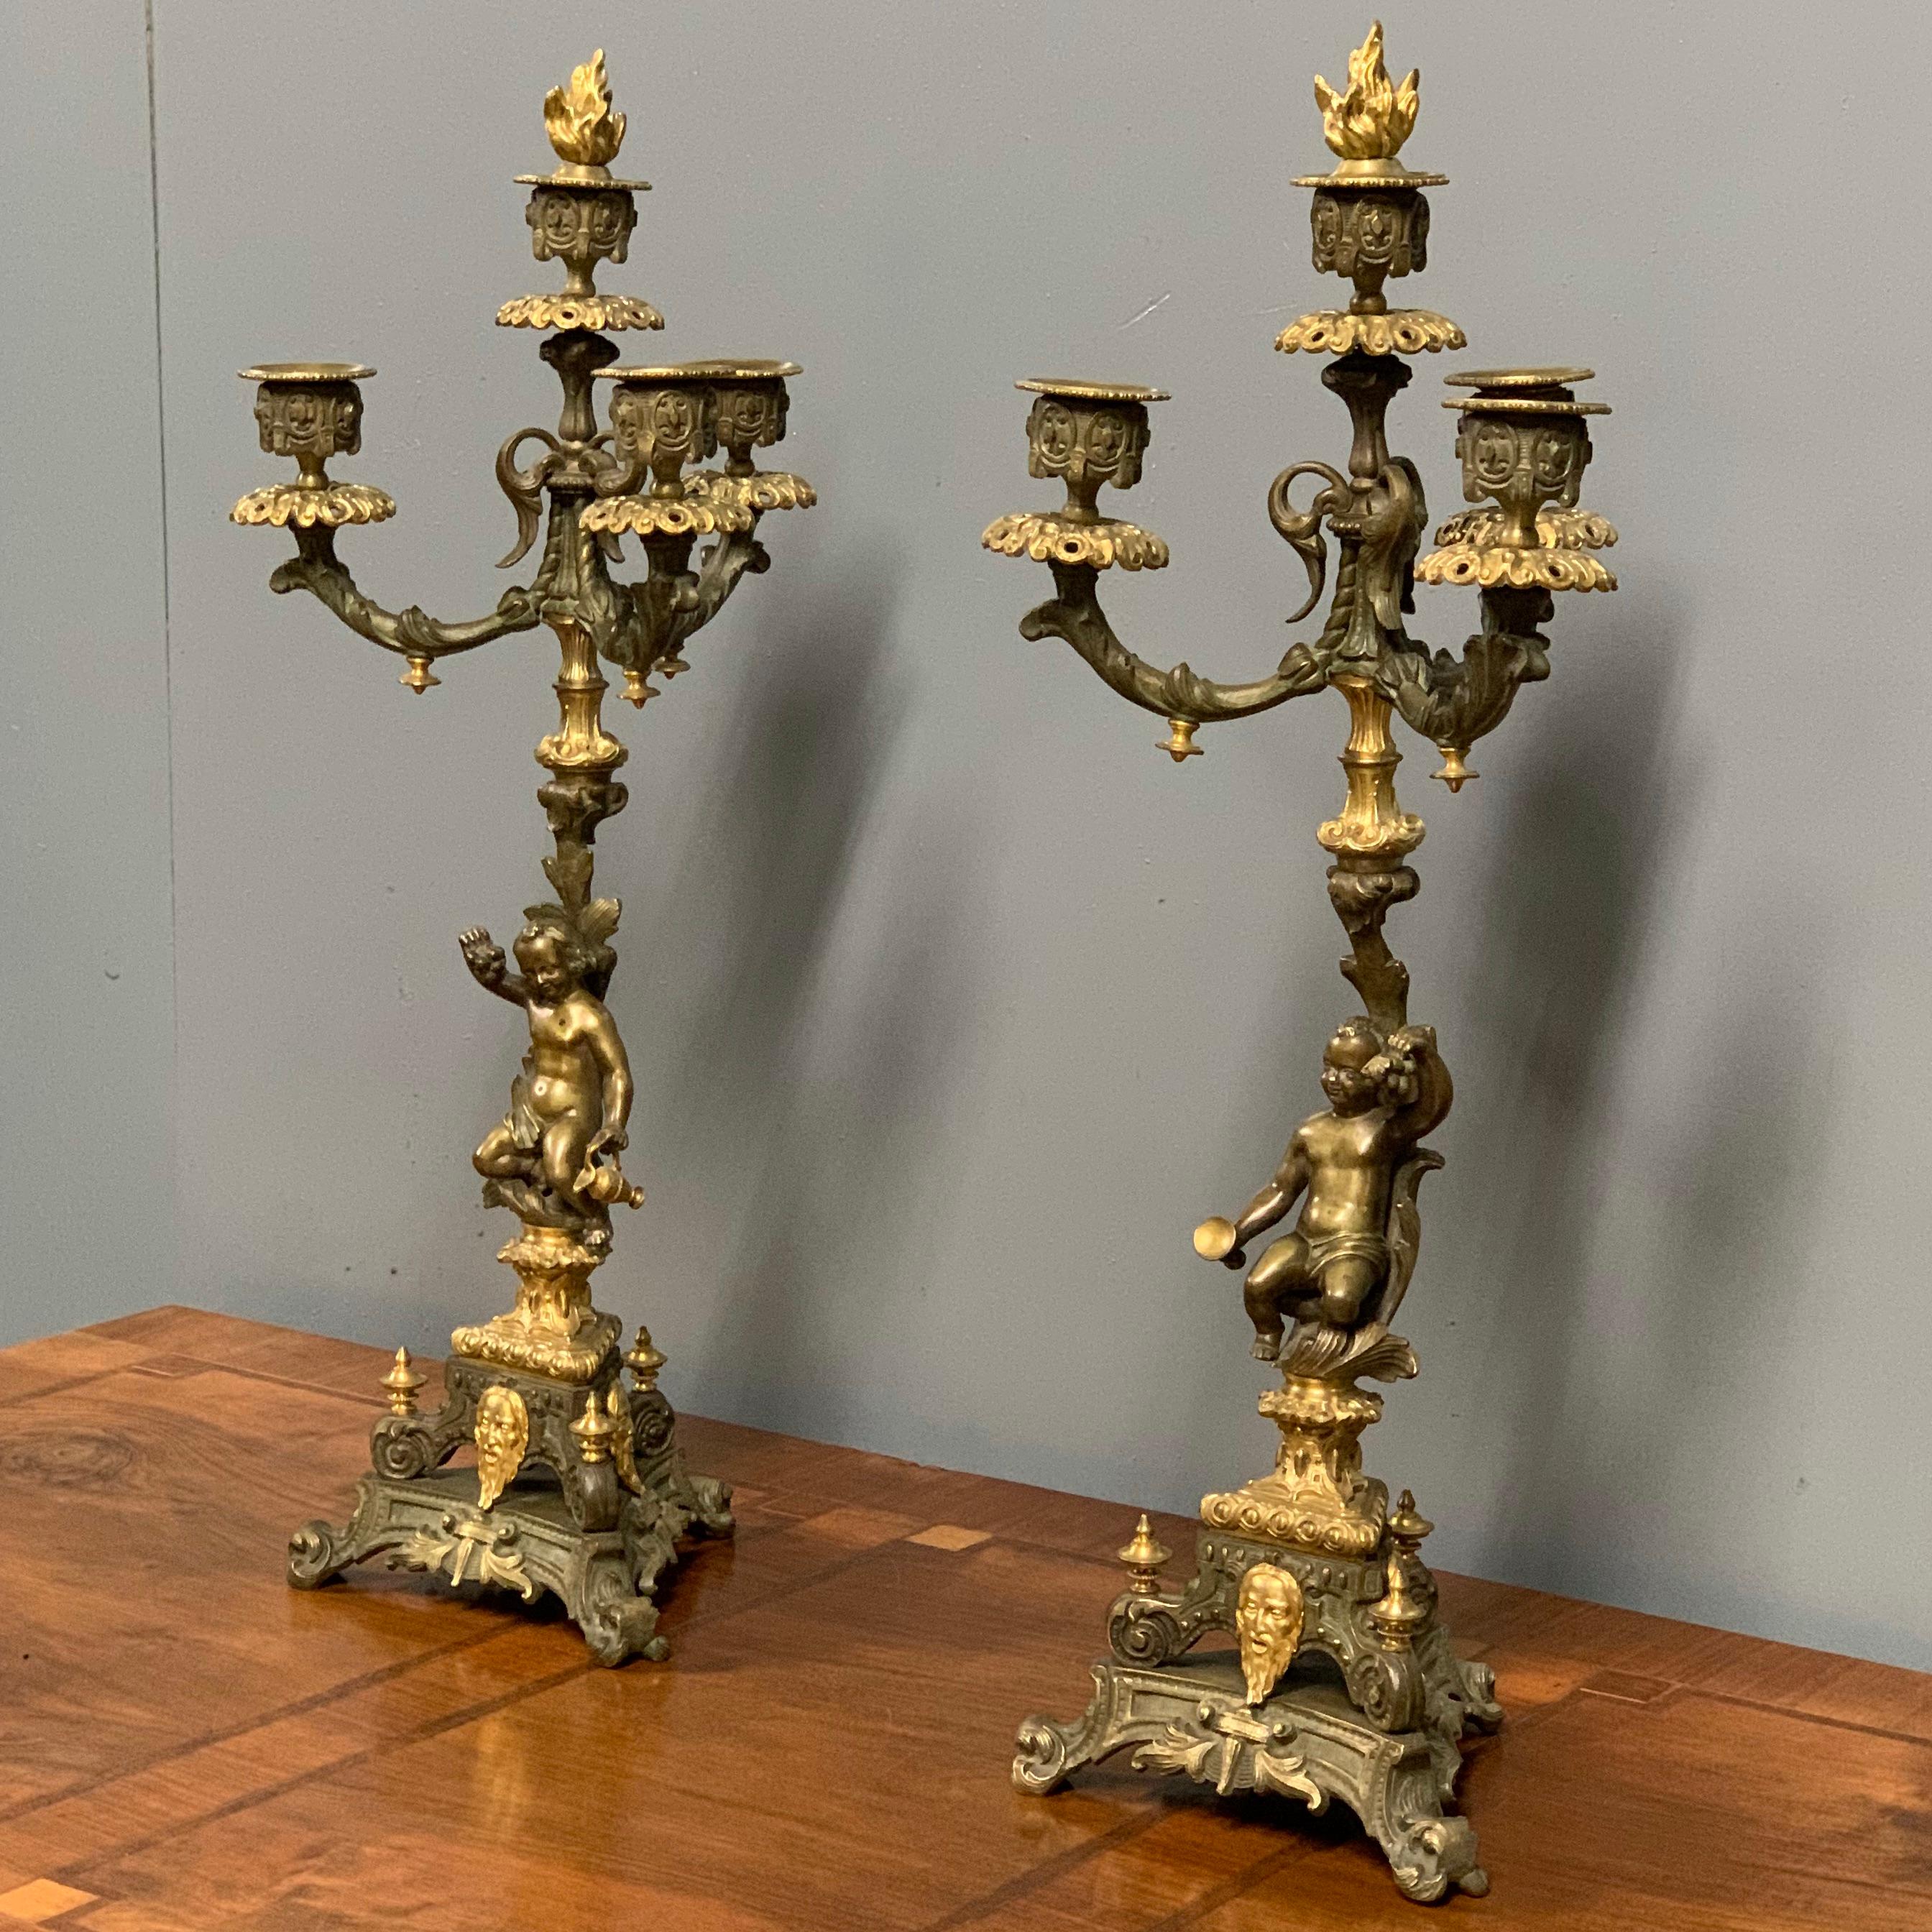 Rococo French 19th Century Gilt Bronze 3 Branch Candelabras with Candle Snuffers, Pair